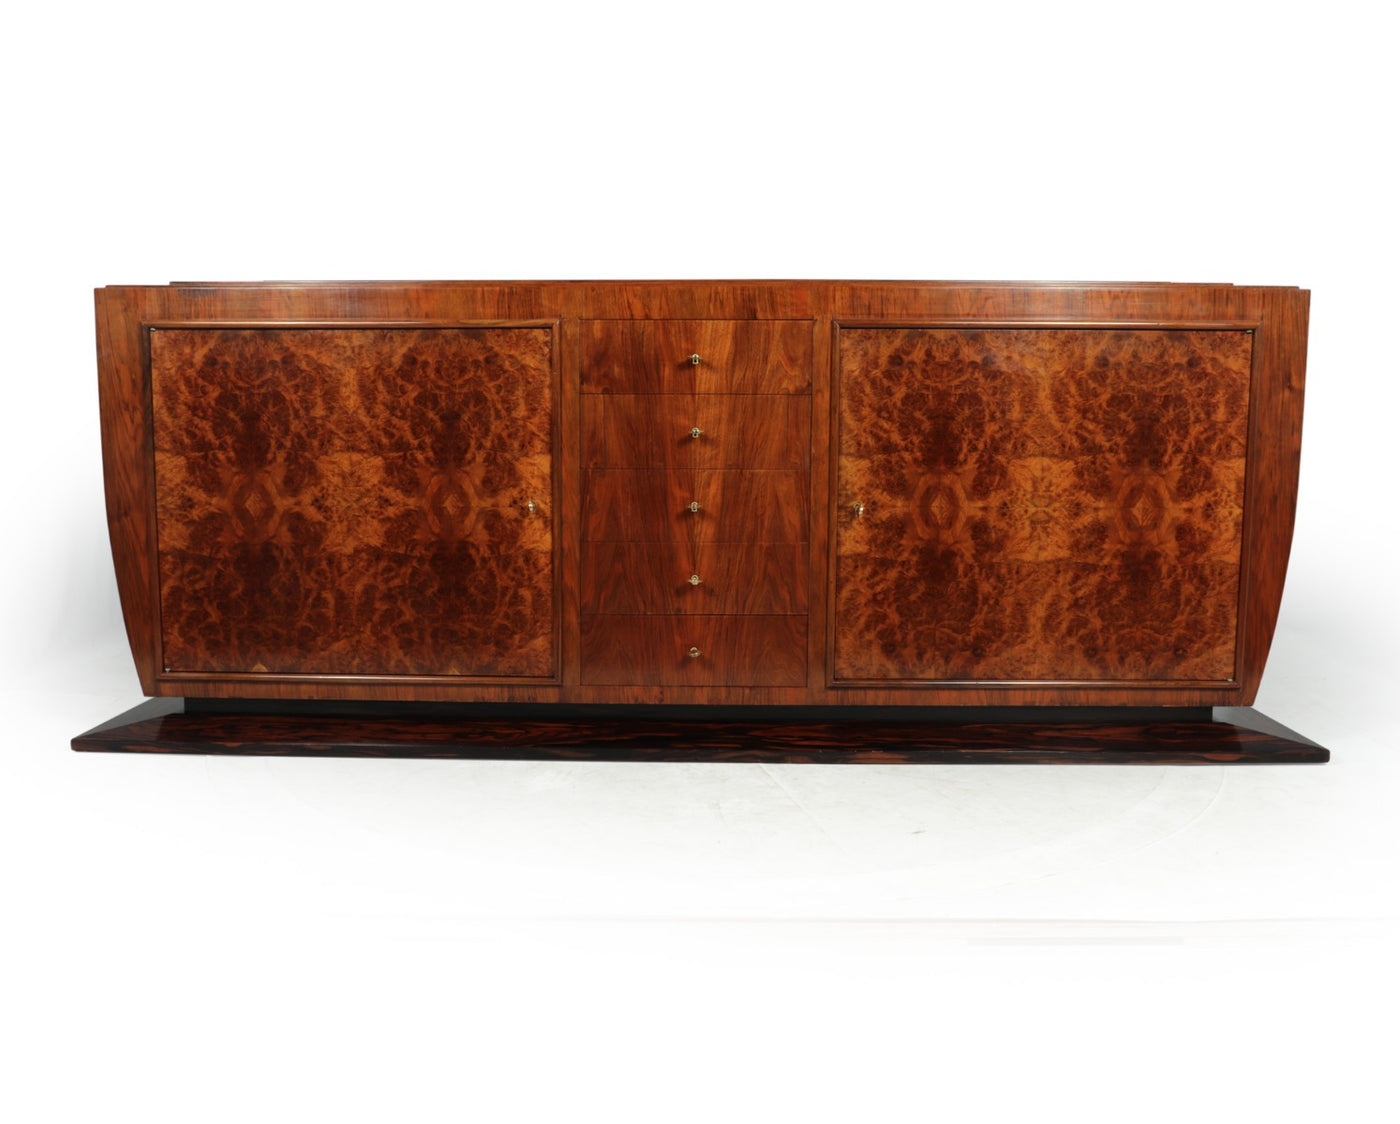 French Art Deco Sideboard A large French Art Deco sideboard, produced in walnut with burr walnut on the doors and crown cut Macassar ebony on the base. There are five central lockable drawers and two large doors with shelves behind, the sideboard has been fully hand polished and is in excellent condition throughout.